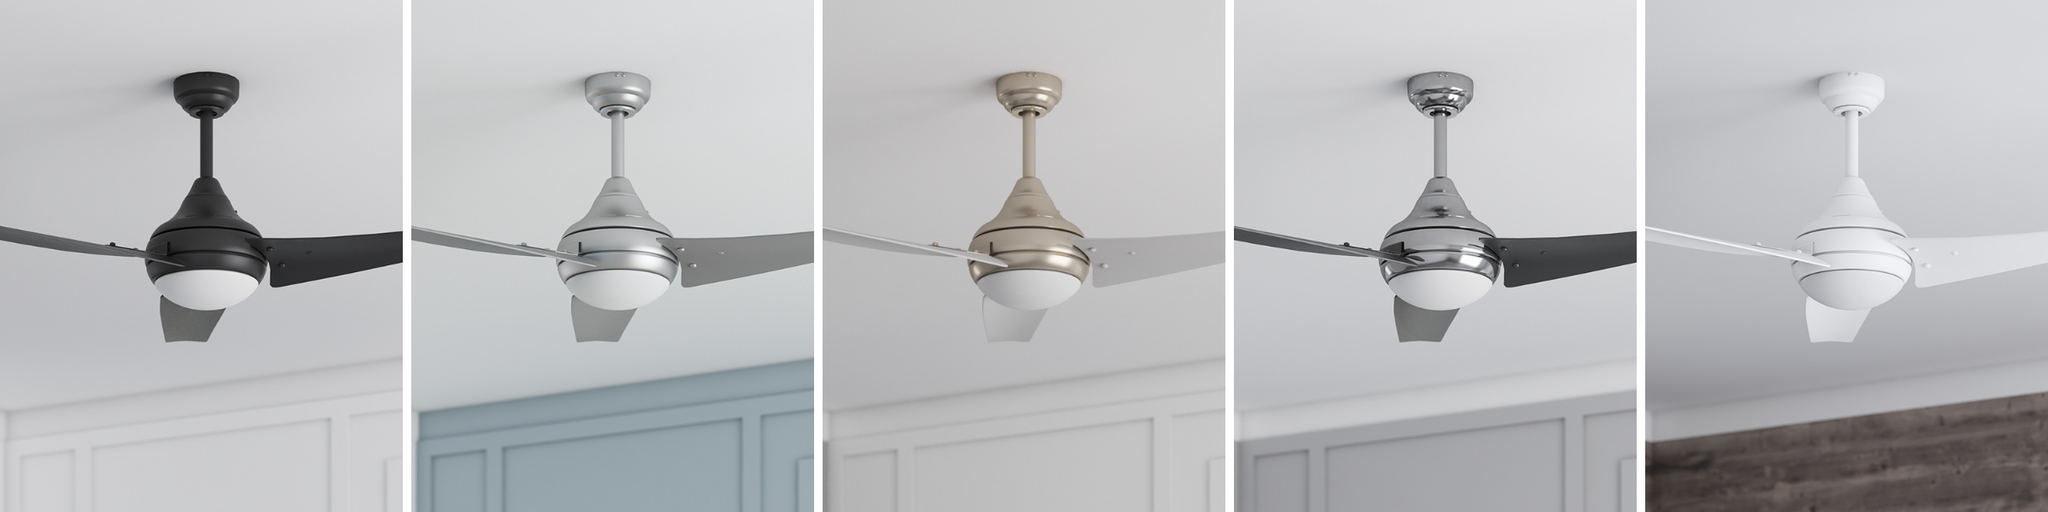 Maxon Ceiling Fan with Light by Prominence Home